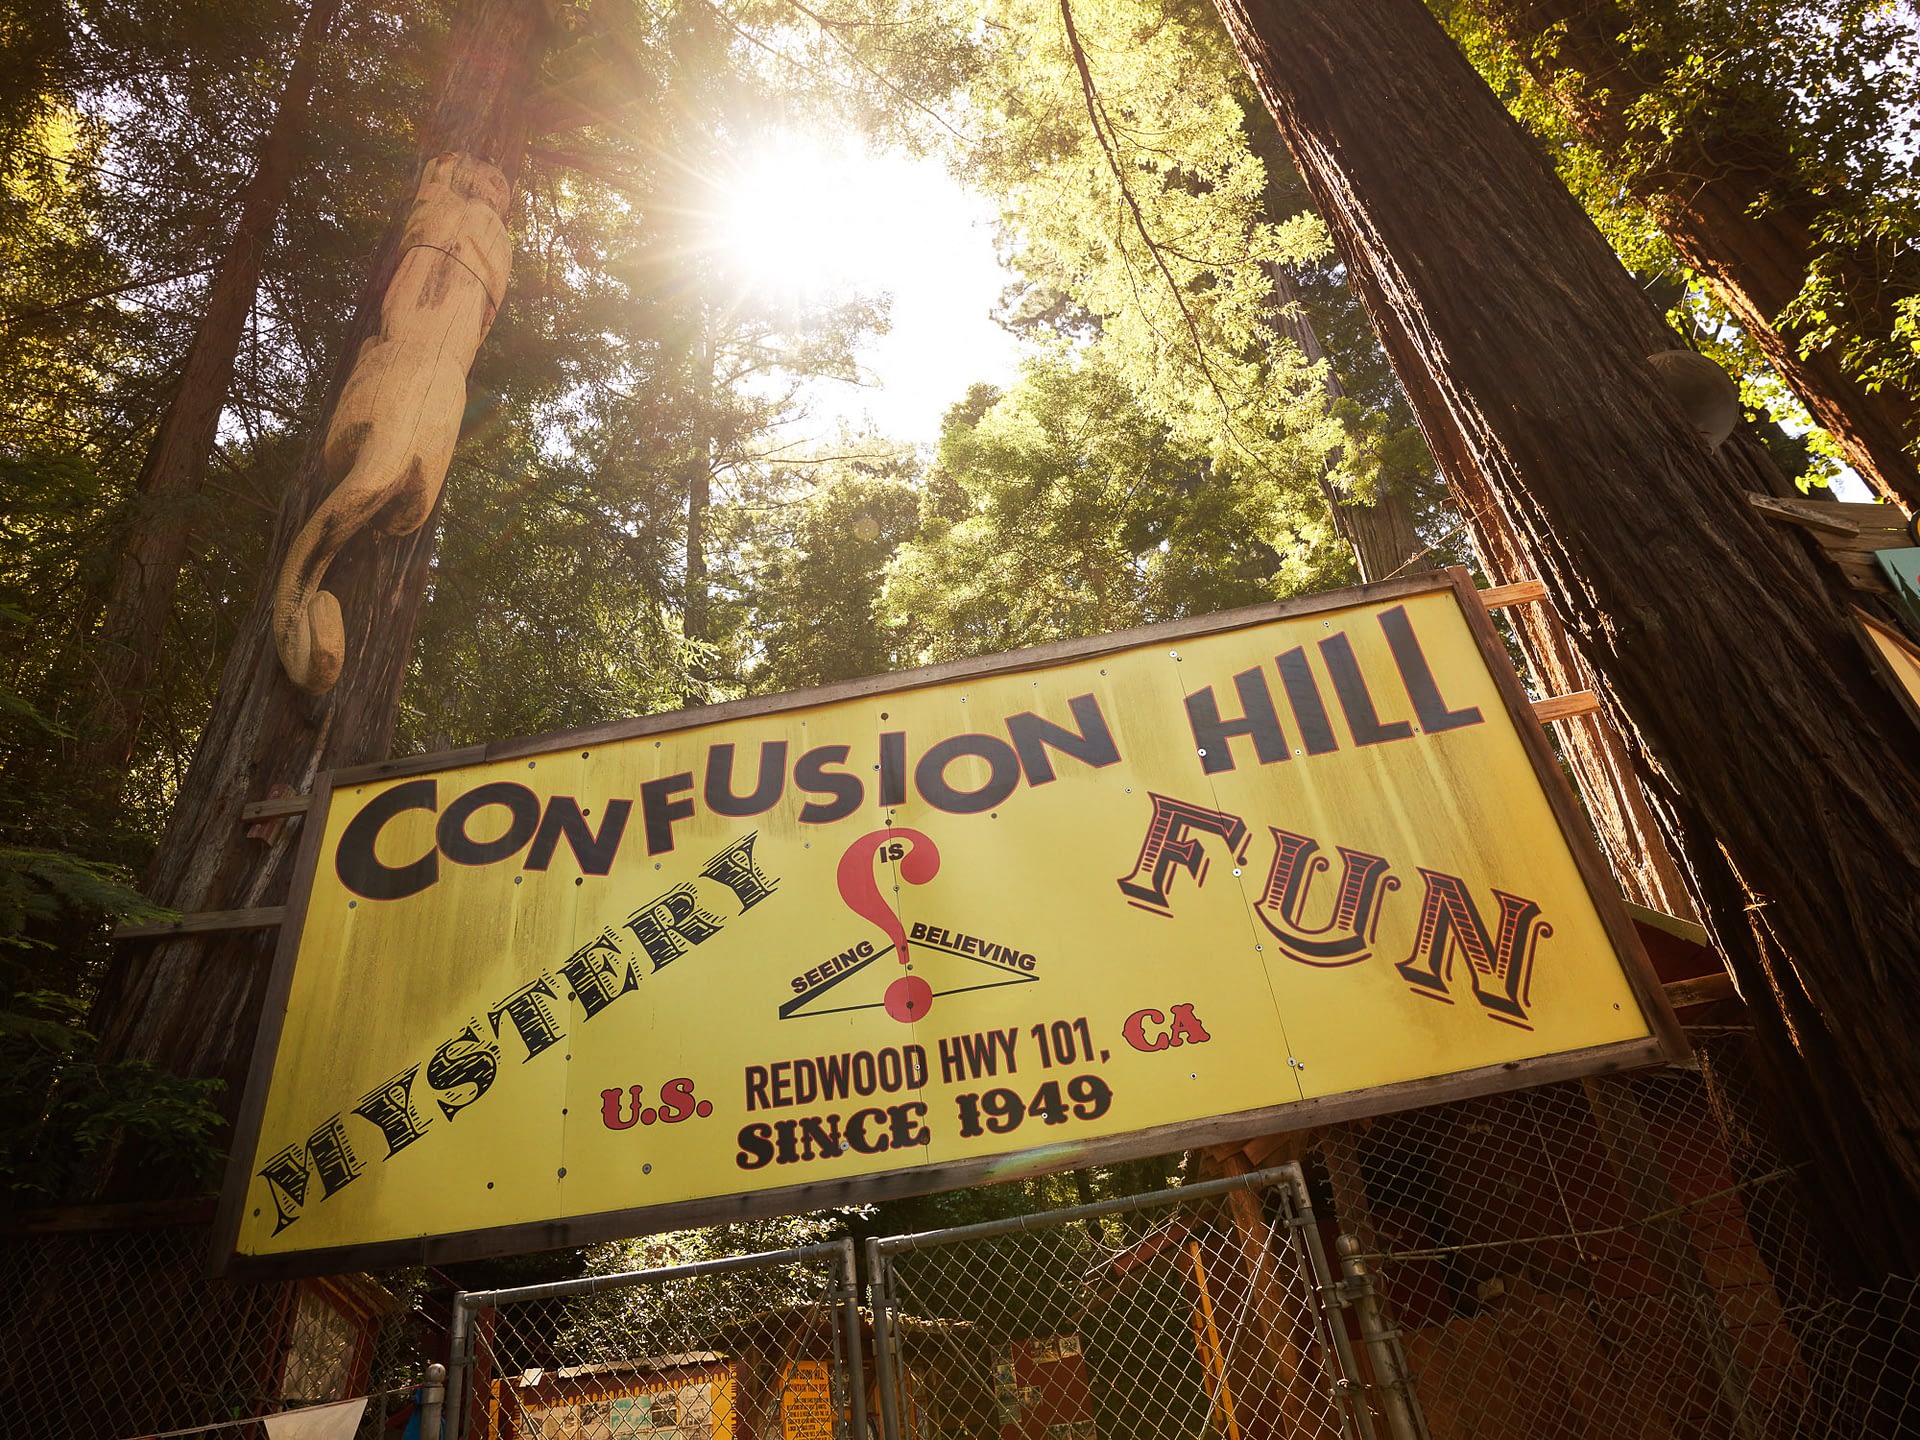 CONFUSION HILL by Ross Feighery